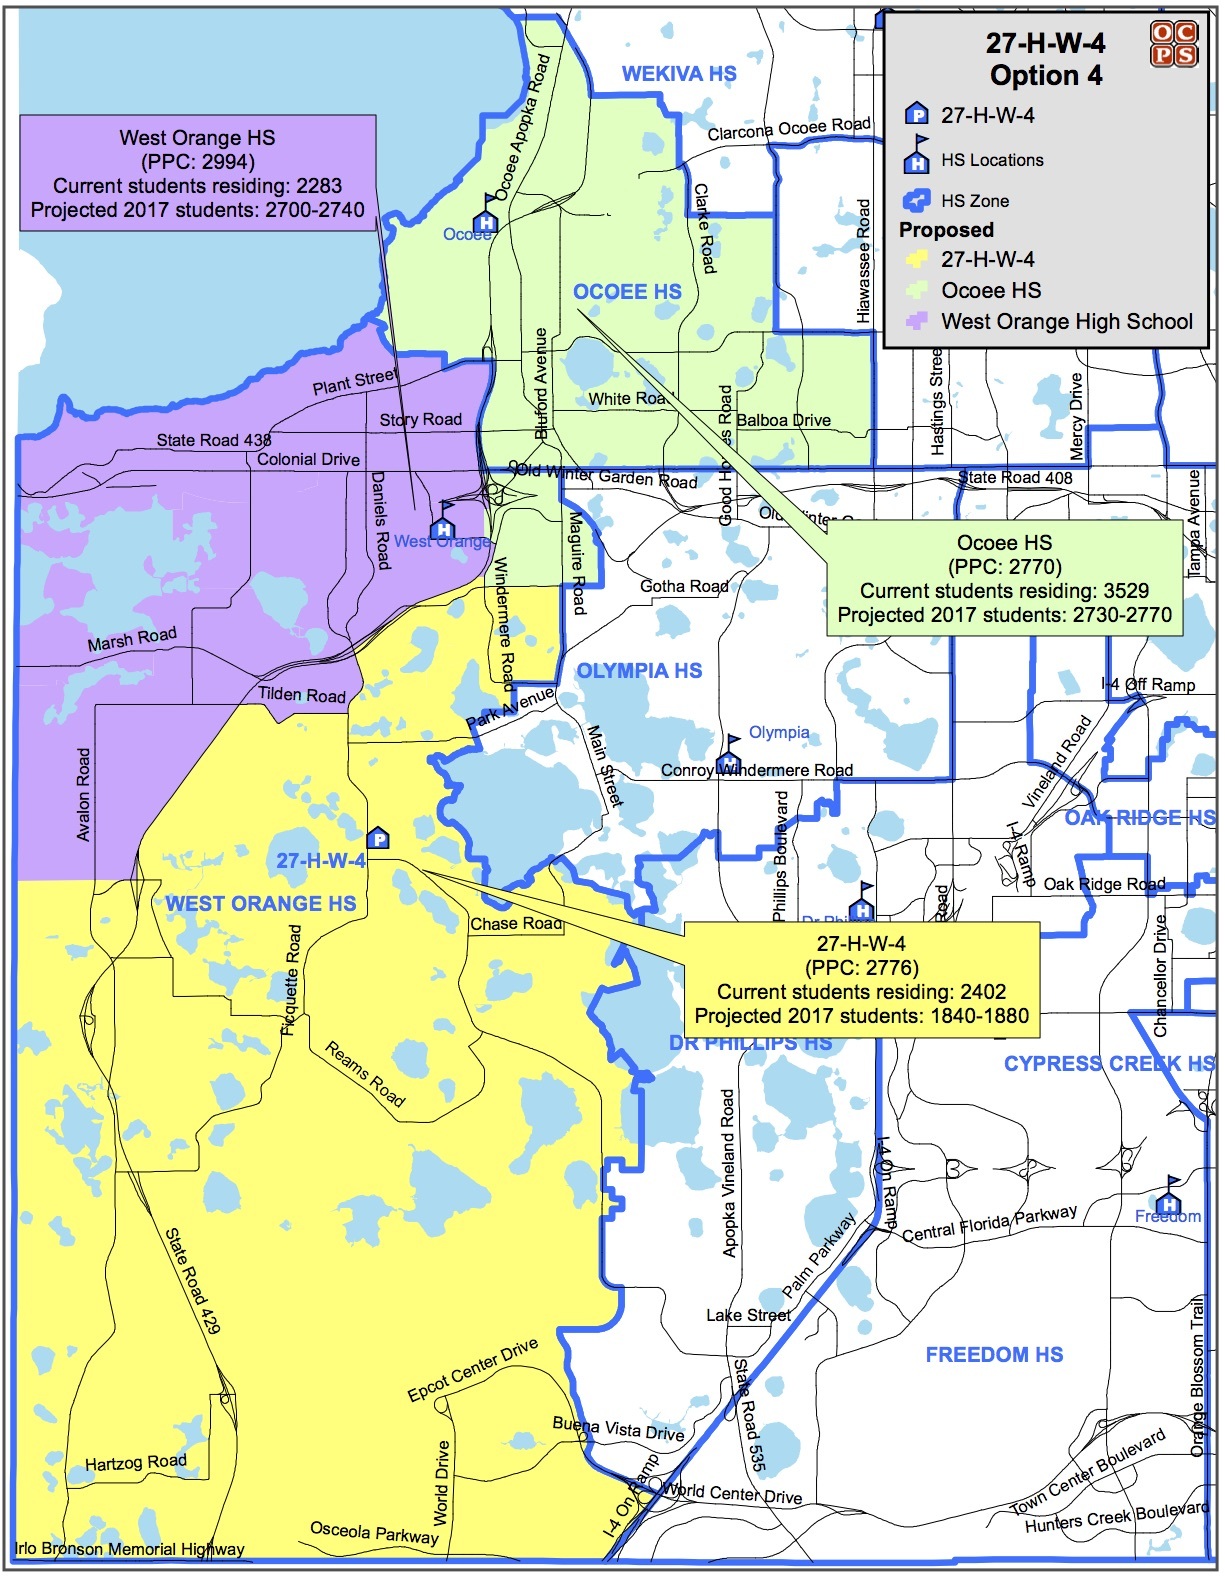 Option 4 would involve Ocoee High annexing some West Orange High territory, but staff is least fond of this option.